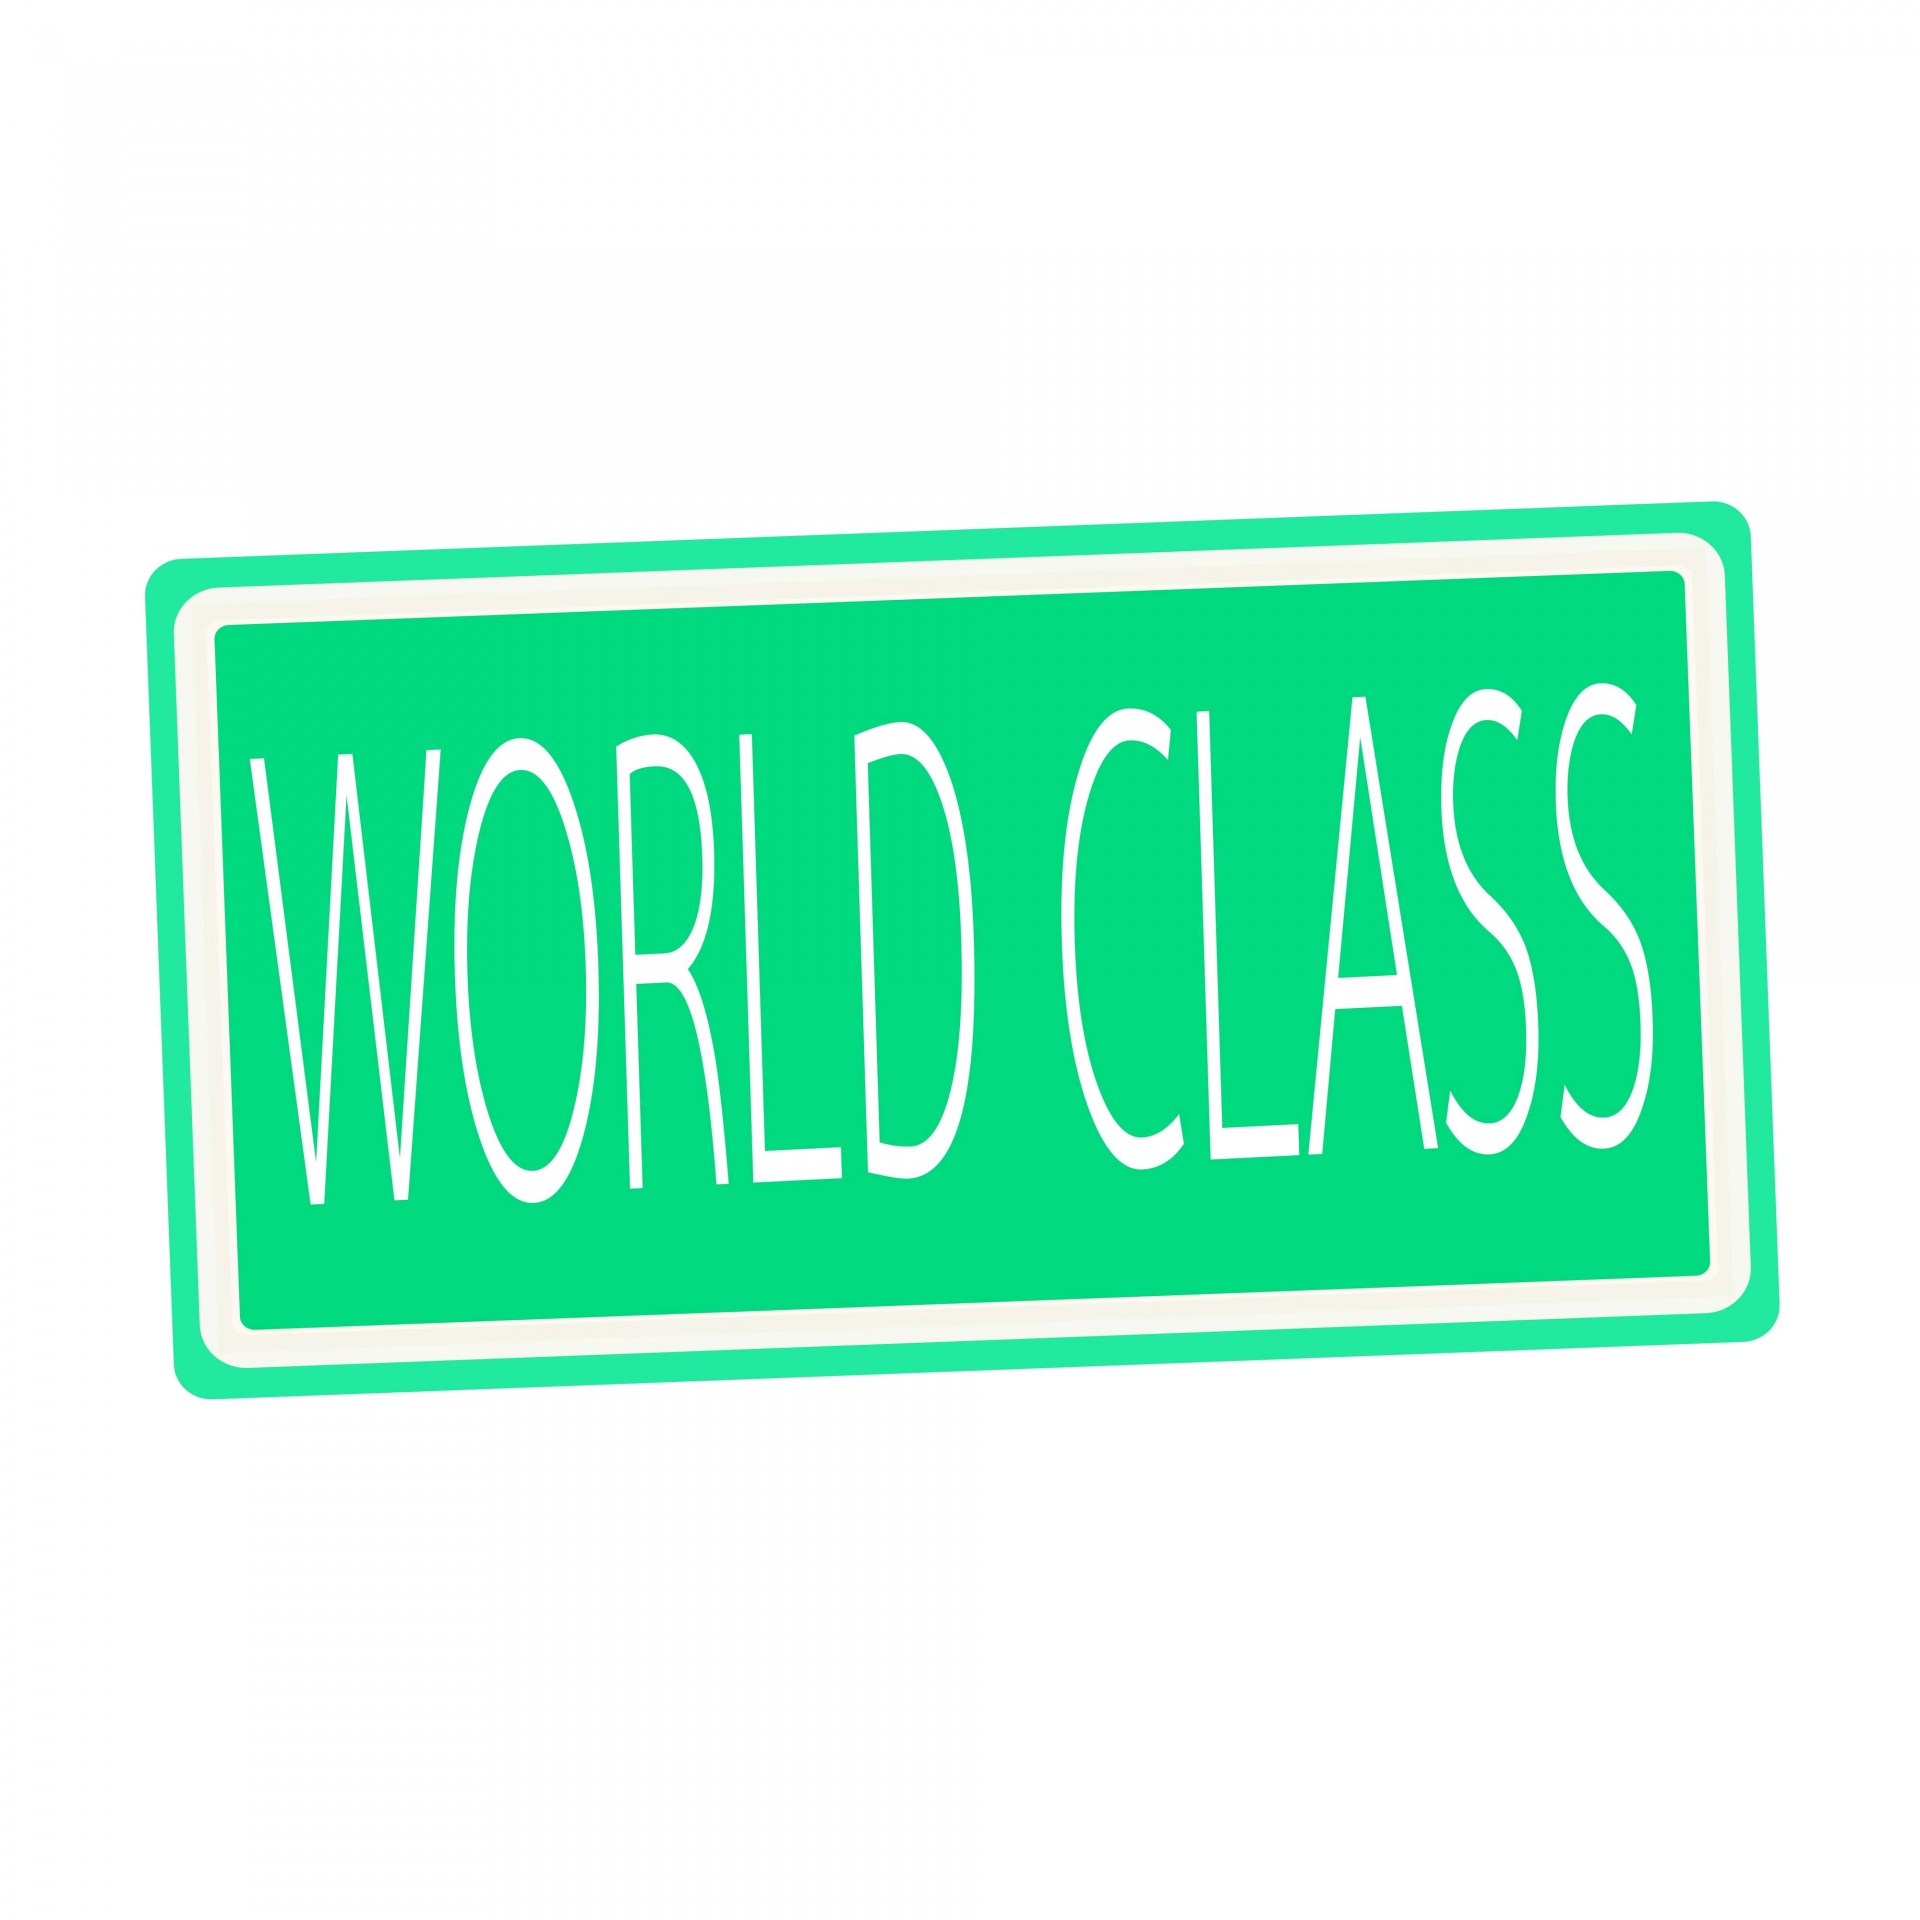 World Class White Stamp Text On Green